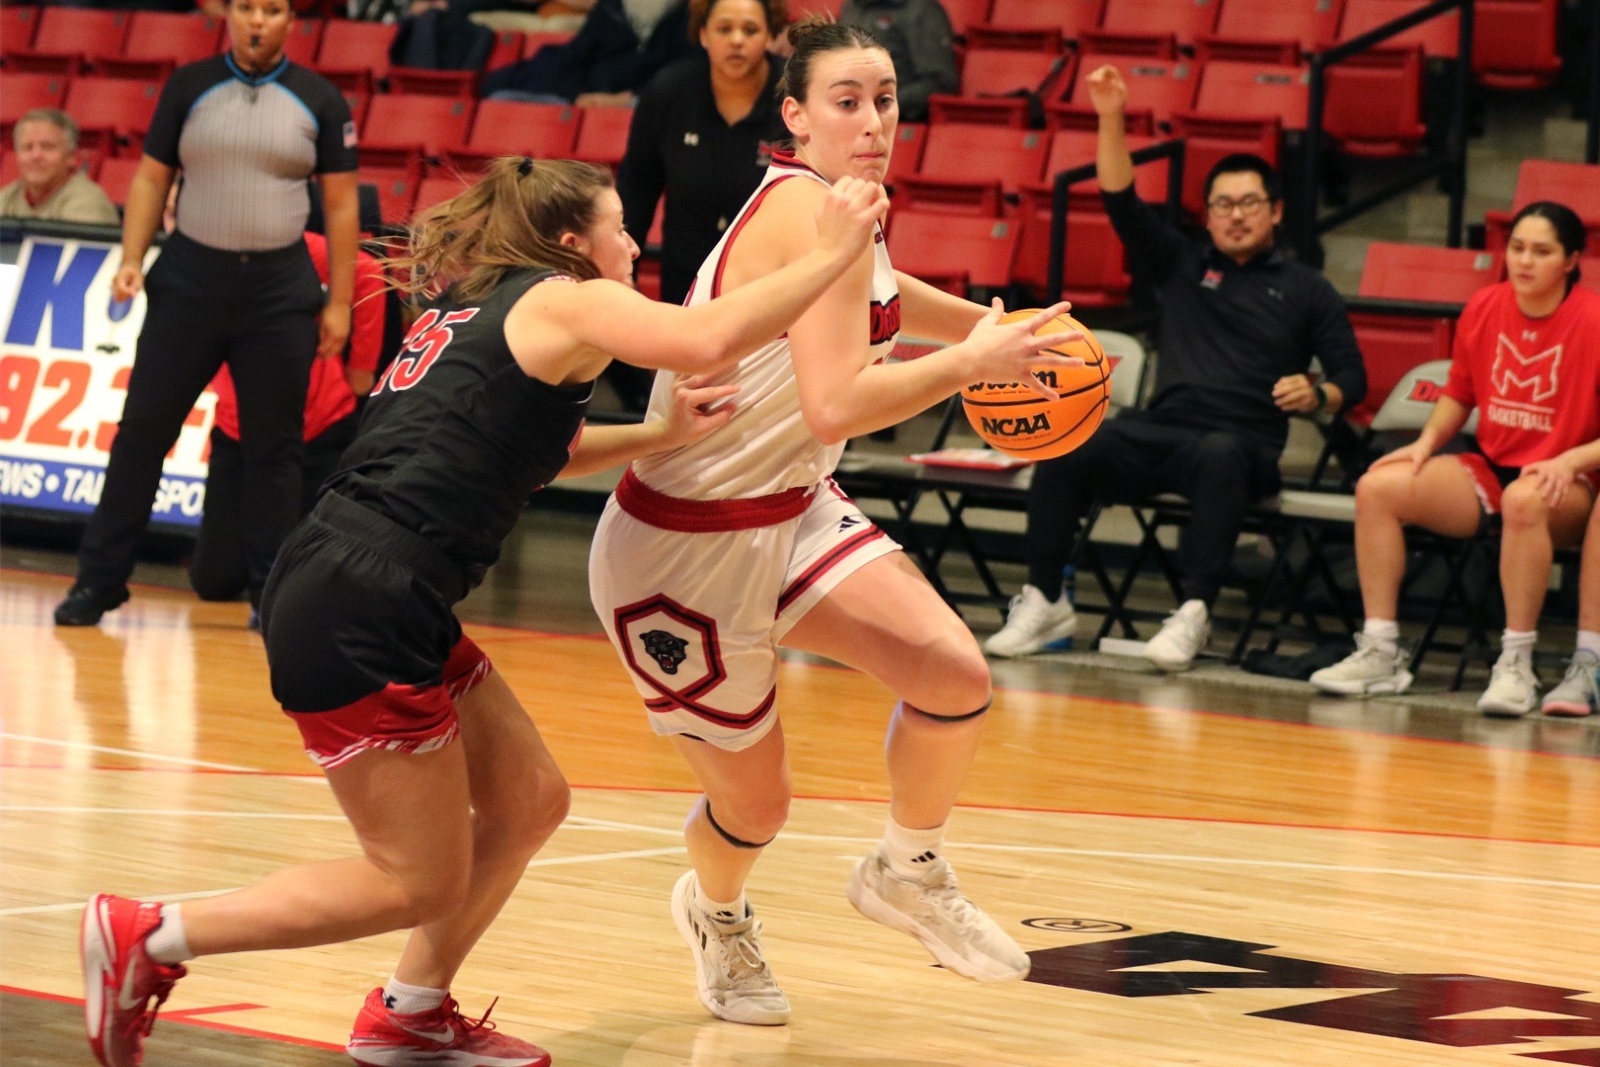 Reese Schaaf, wearing a Drury women's basketball uniform, dribbles the ball during a game.